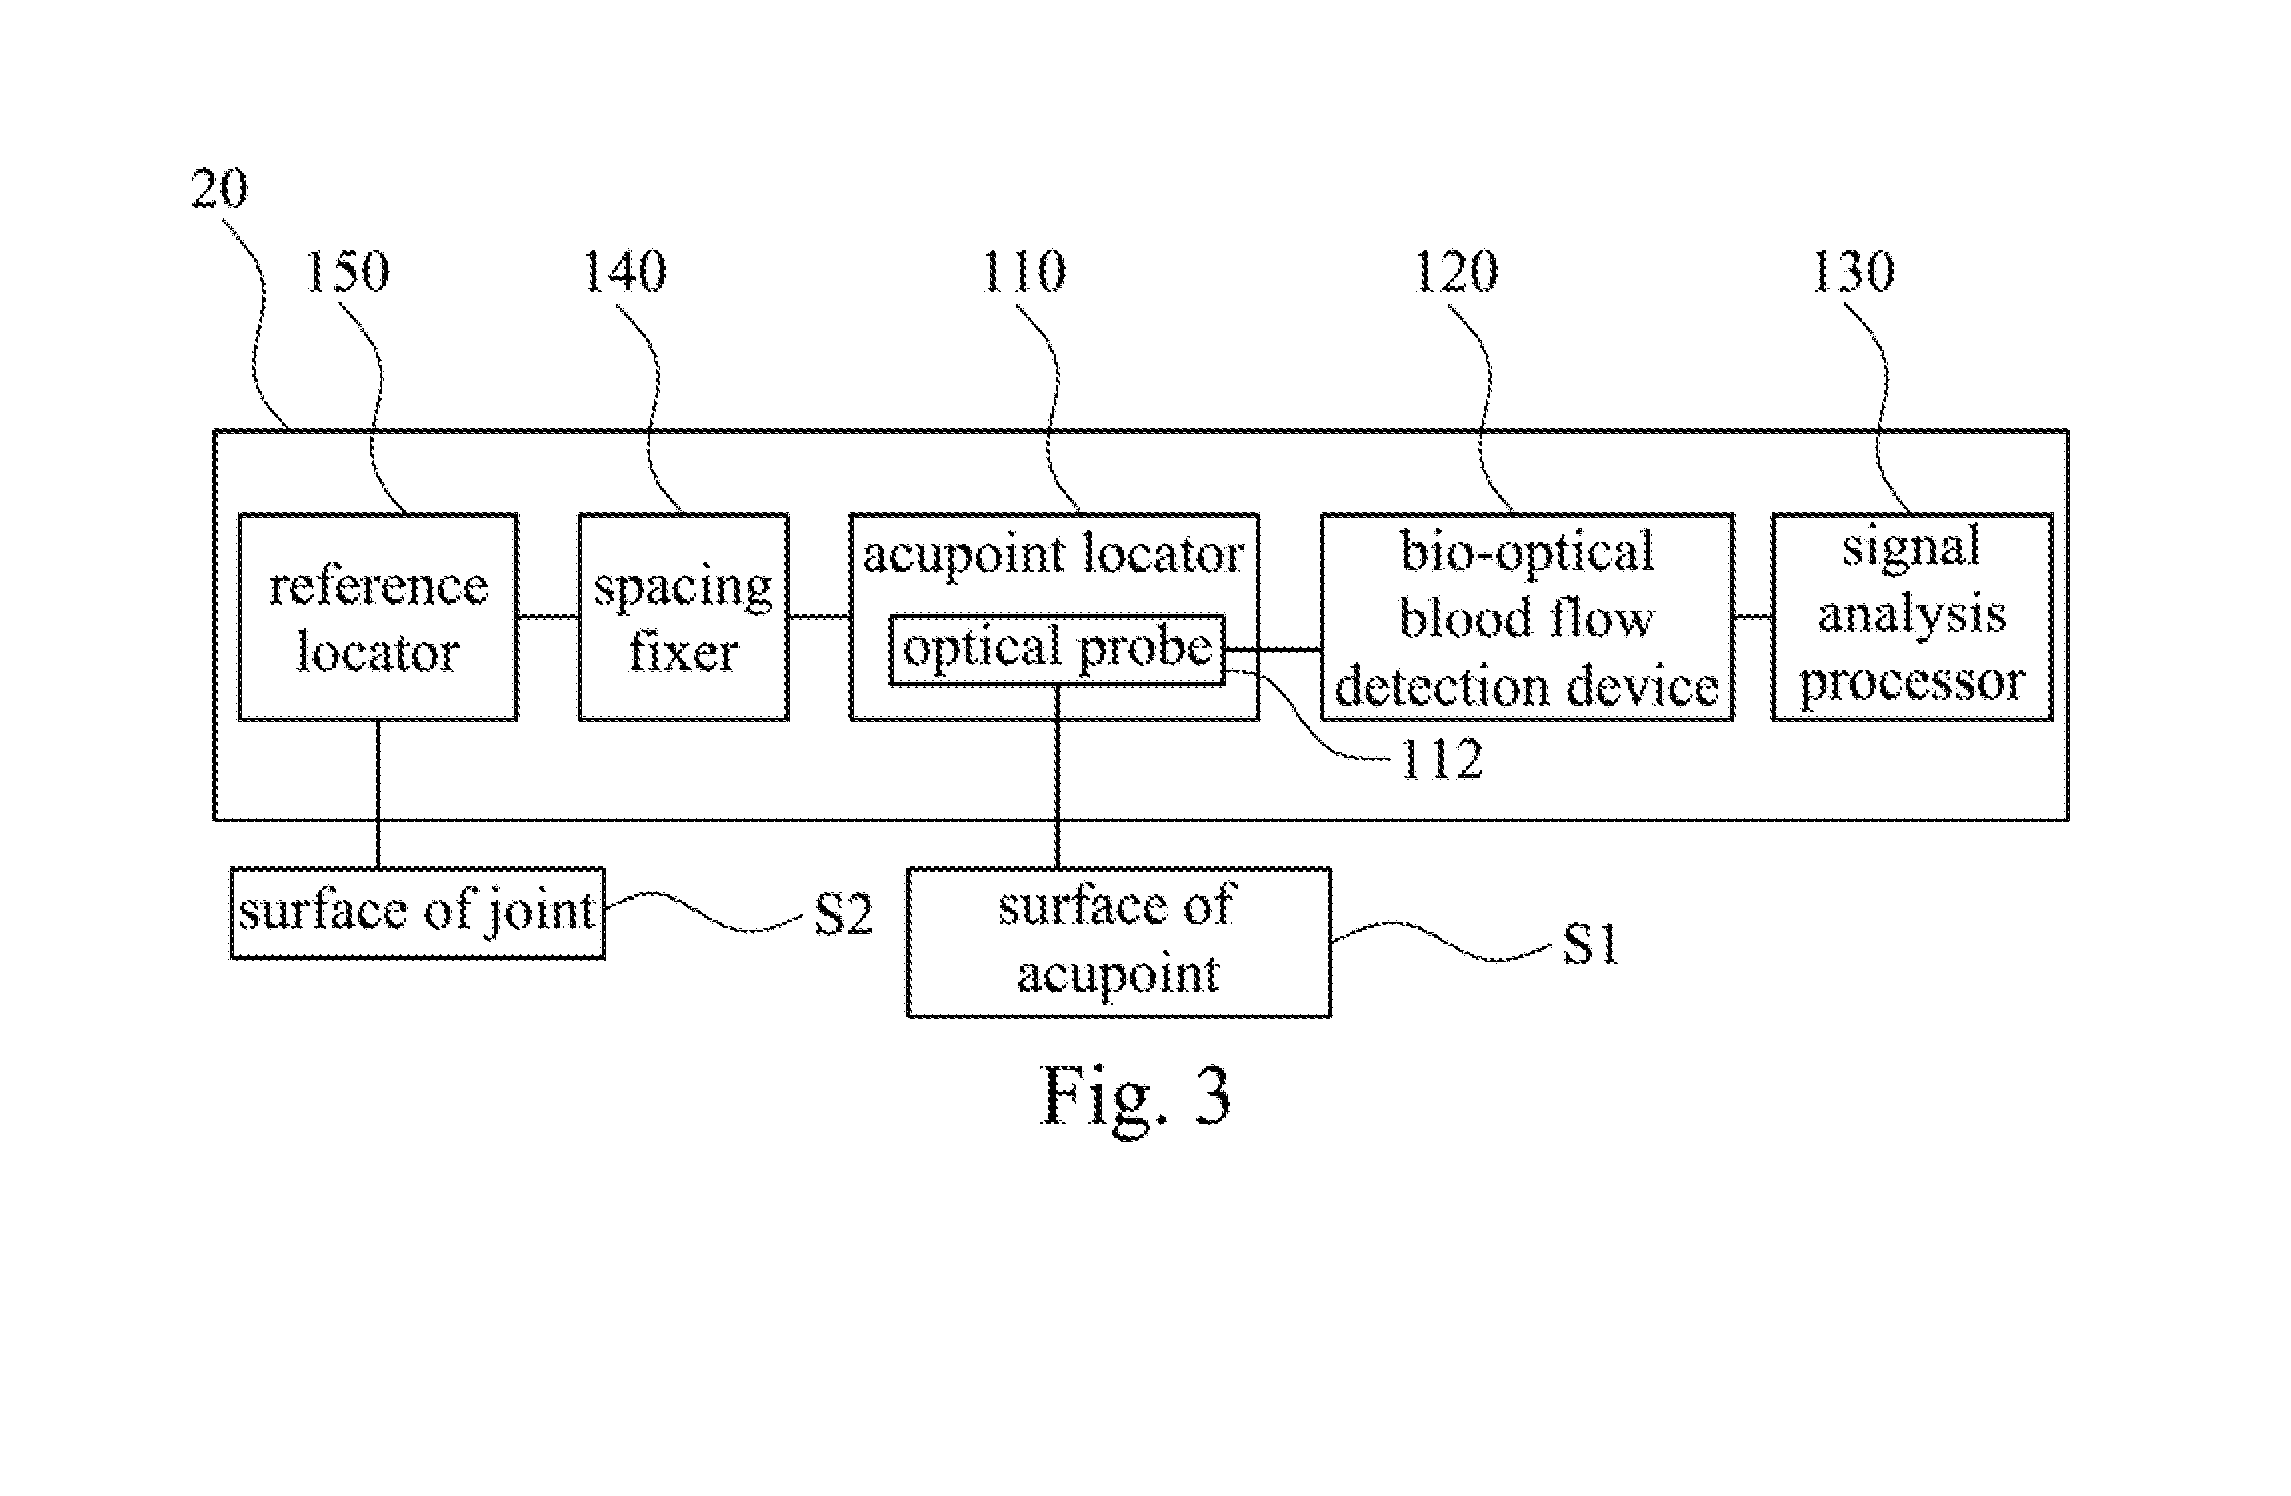 Apparatus for detecting surface microcirculation of acupoint